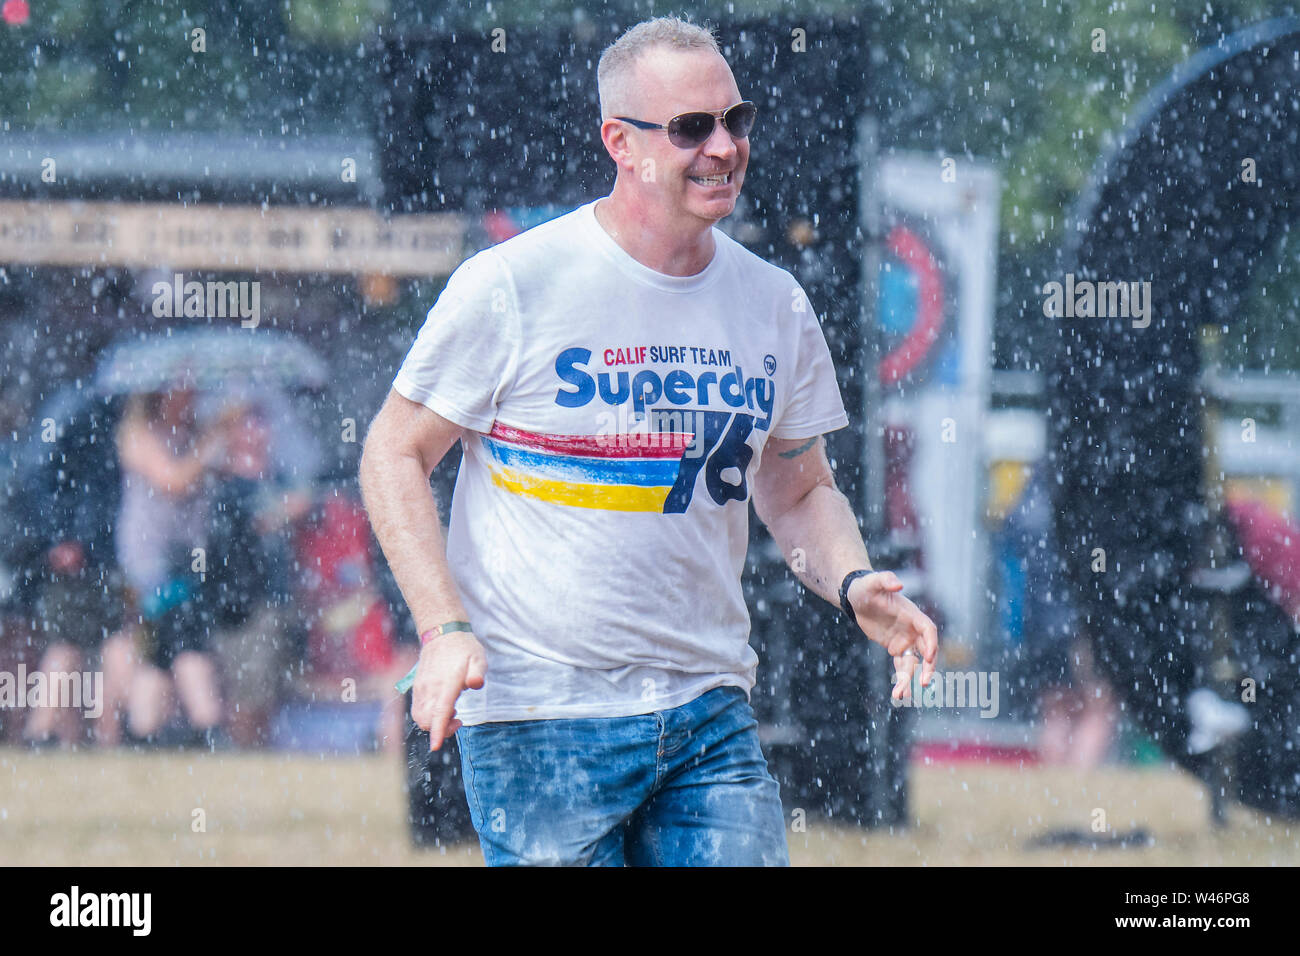 Henham Park, Suffolk, UK, , 20 July 2019. Superdry? The rain falls and people dash for cover - The 2019 Latitude Festival. Credit: Guy Bell/Alamy Live News  Stock Photo